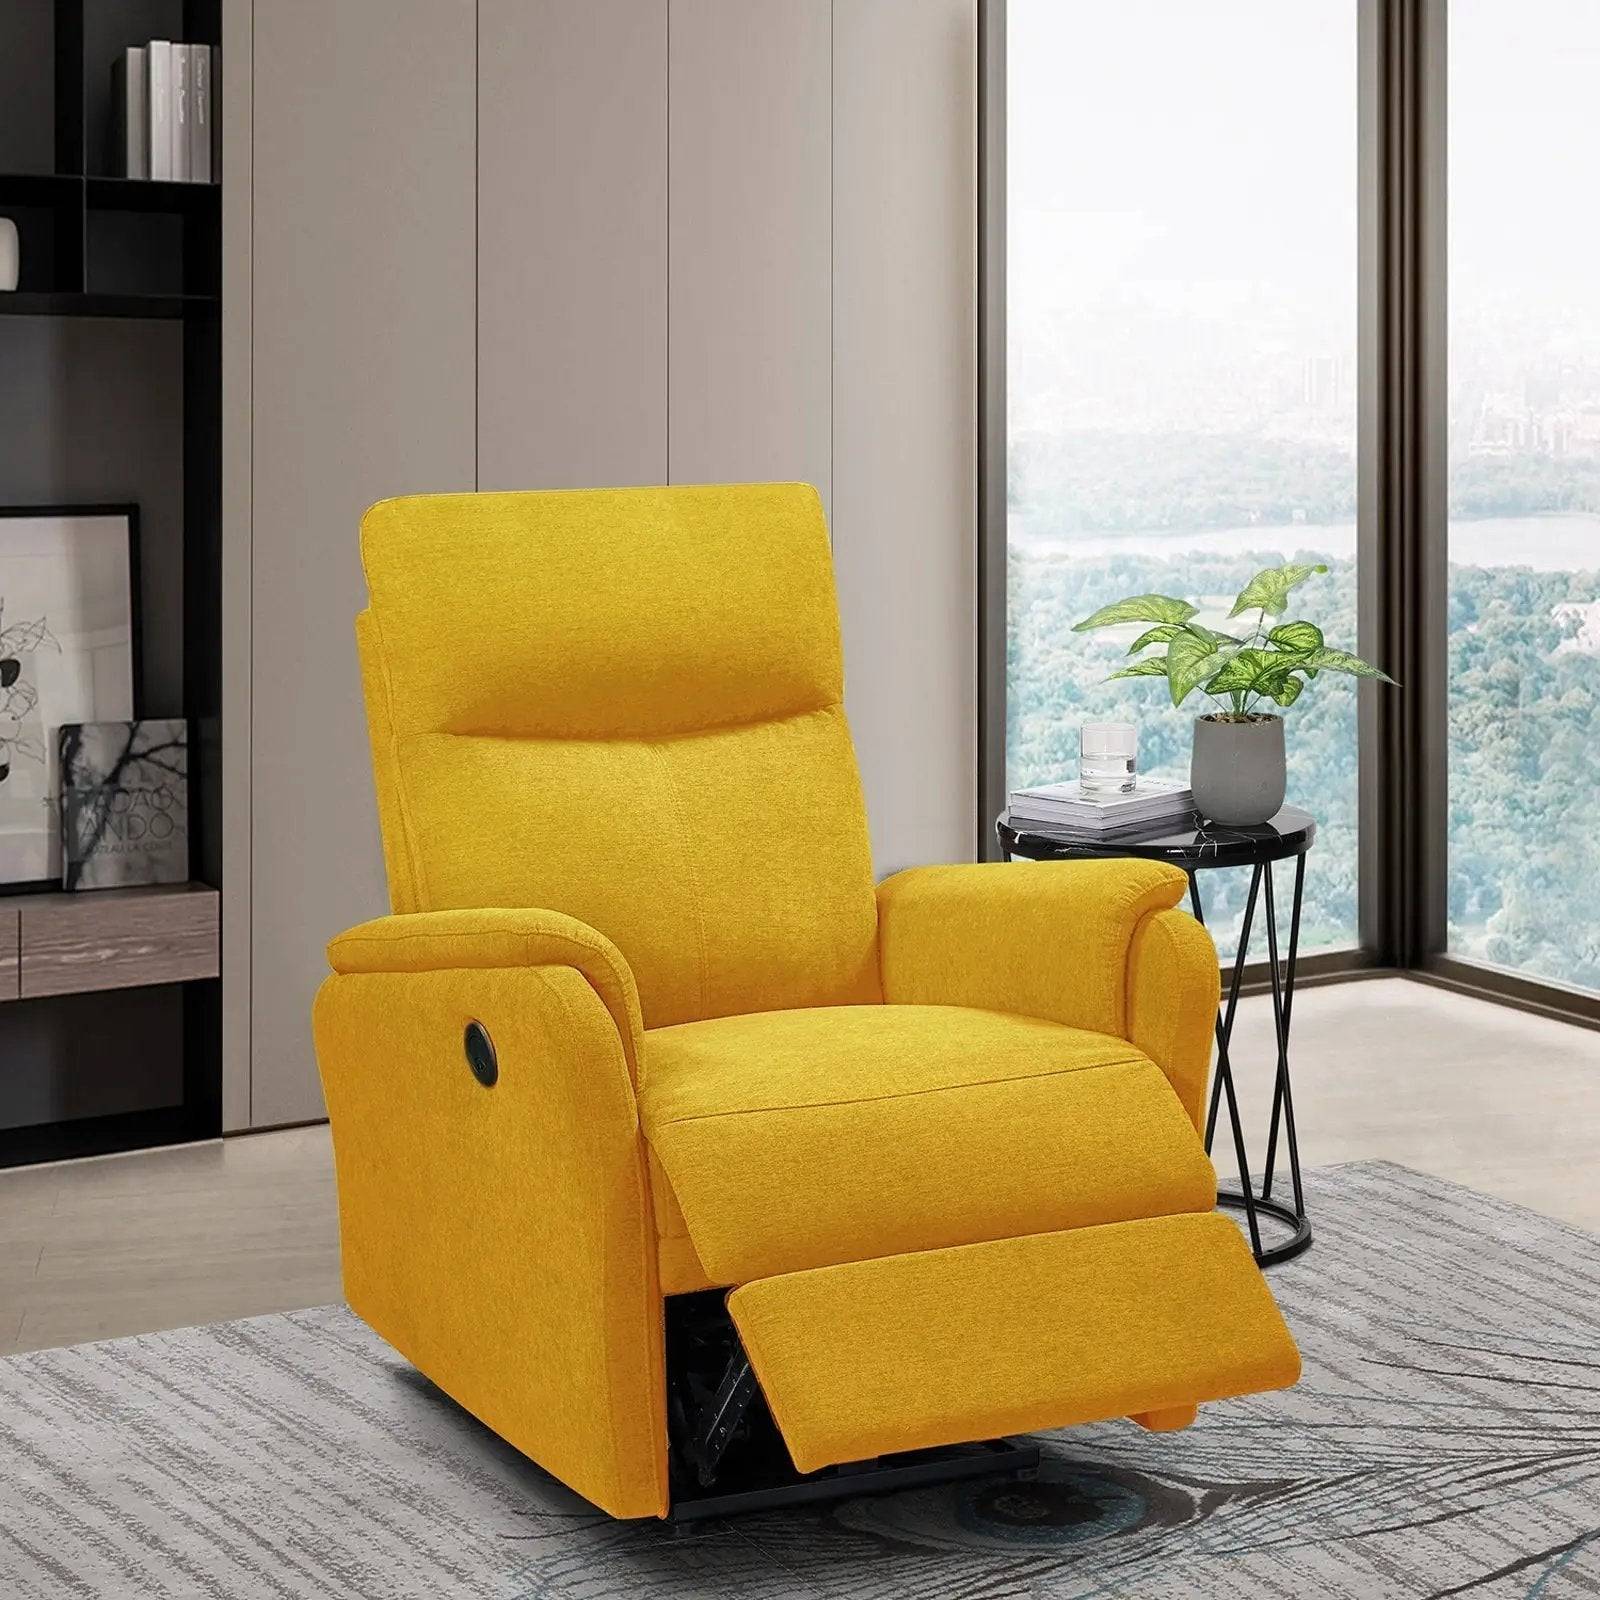 Recliner Chair With Recliner Chair easy control big stocks , Recliner Single Chair For Living Room , Bed Room